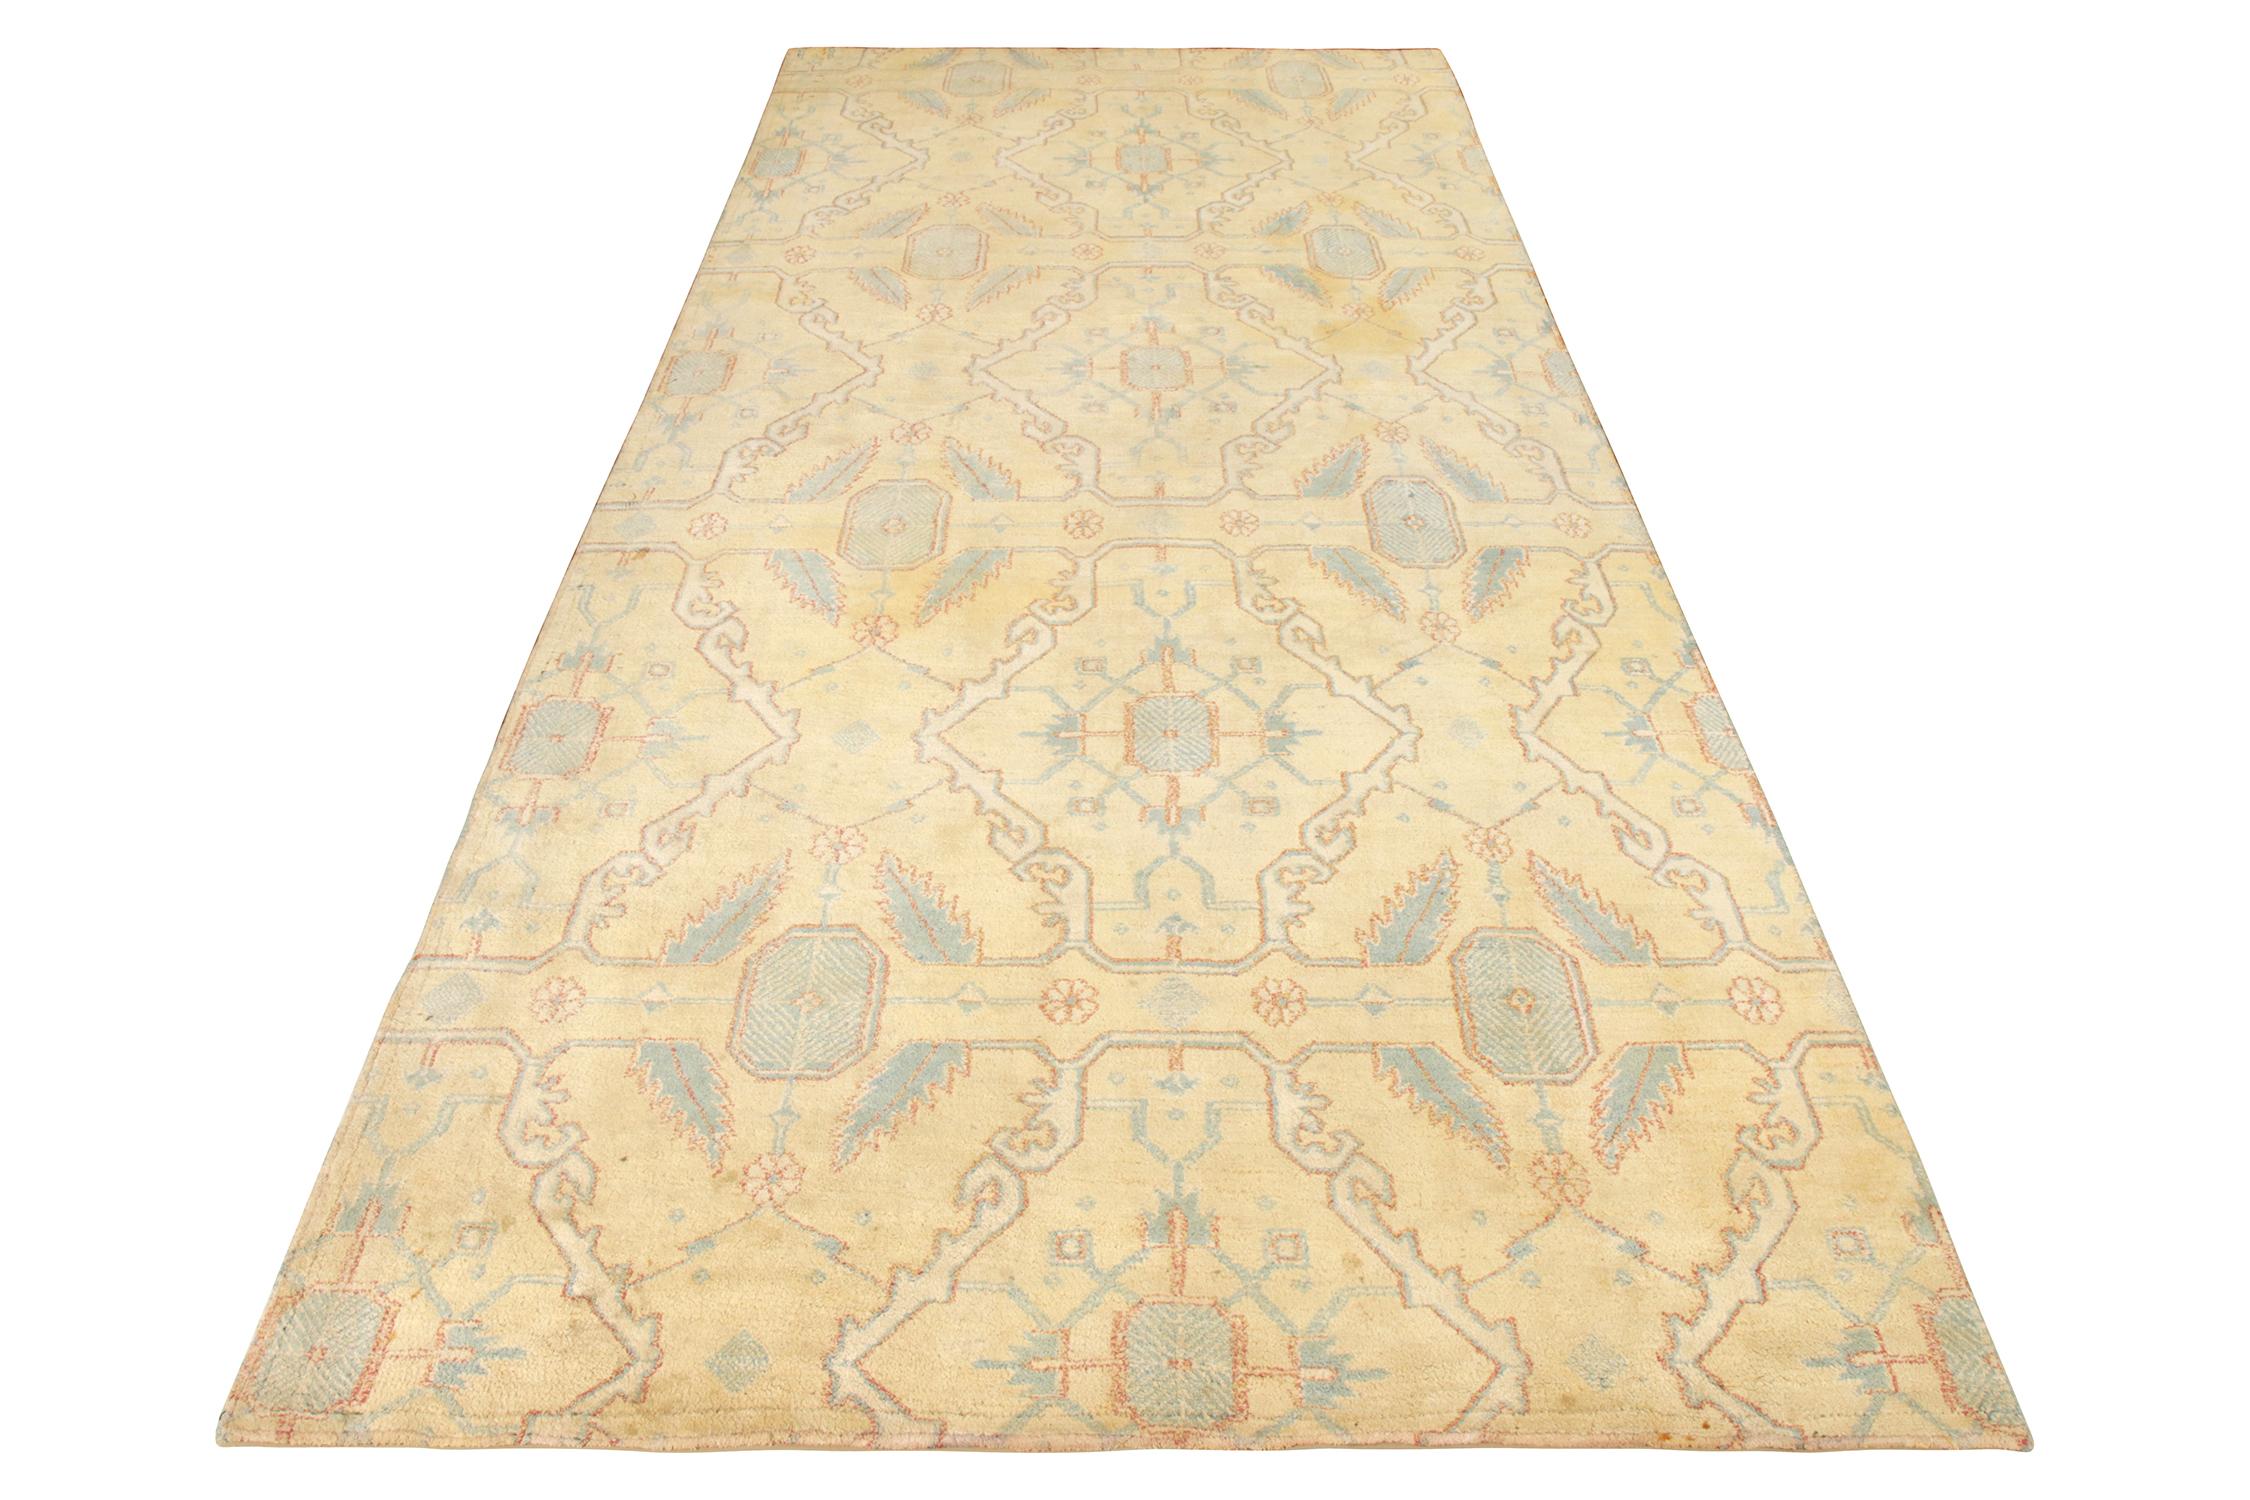 A 6 x 12 fragment runner hailing from an antique Agra rug, handmade in cotton originating from India, circa 1920-1930. Among the finest cotton Agras our principal Josh has seen, both in scale and phenomenal gold-yellow and blue colorway. The play of